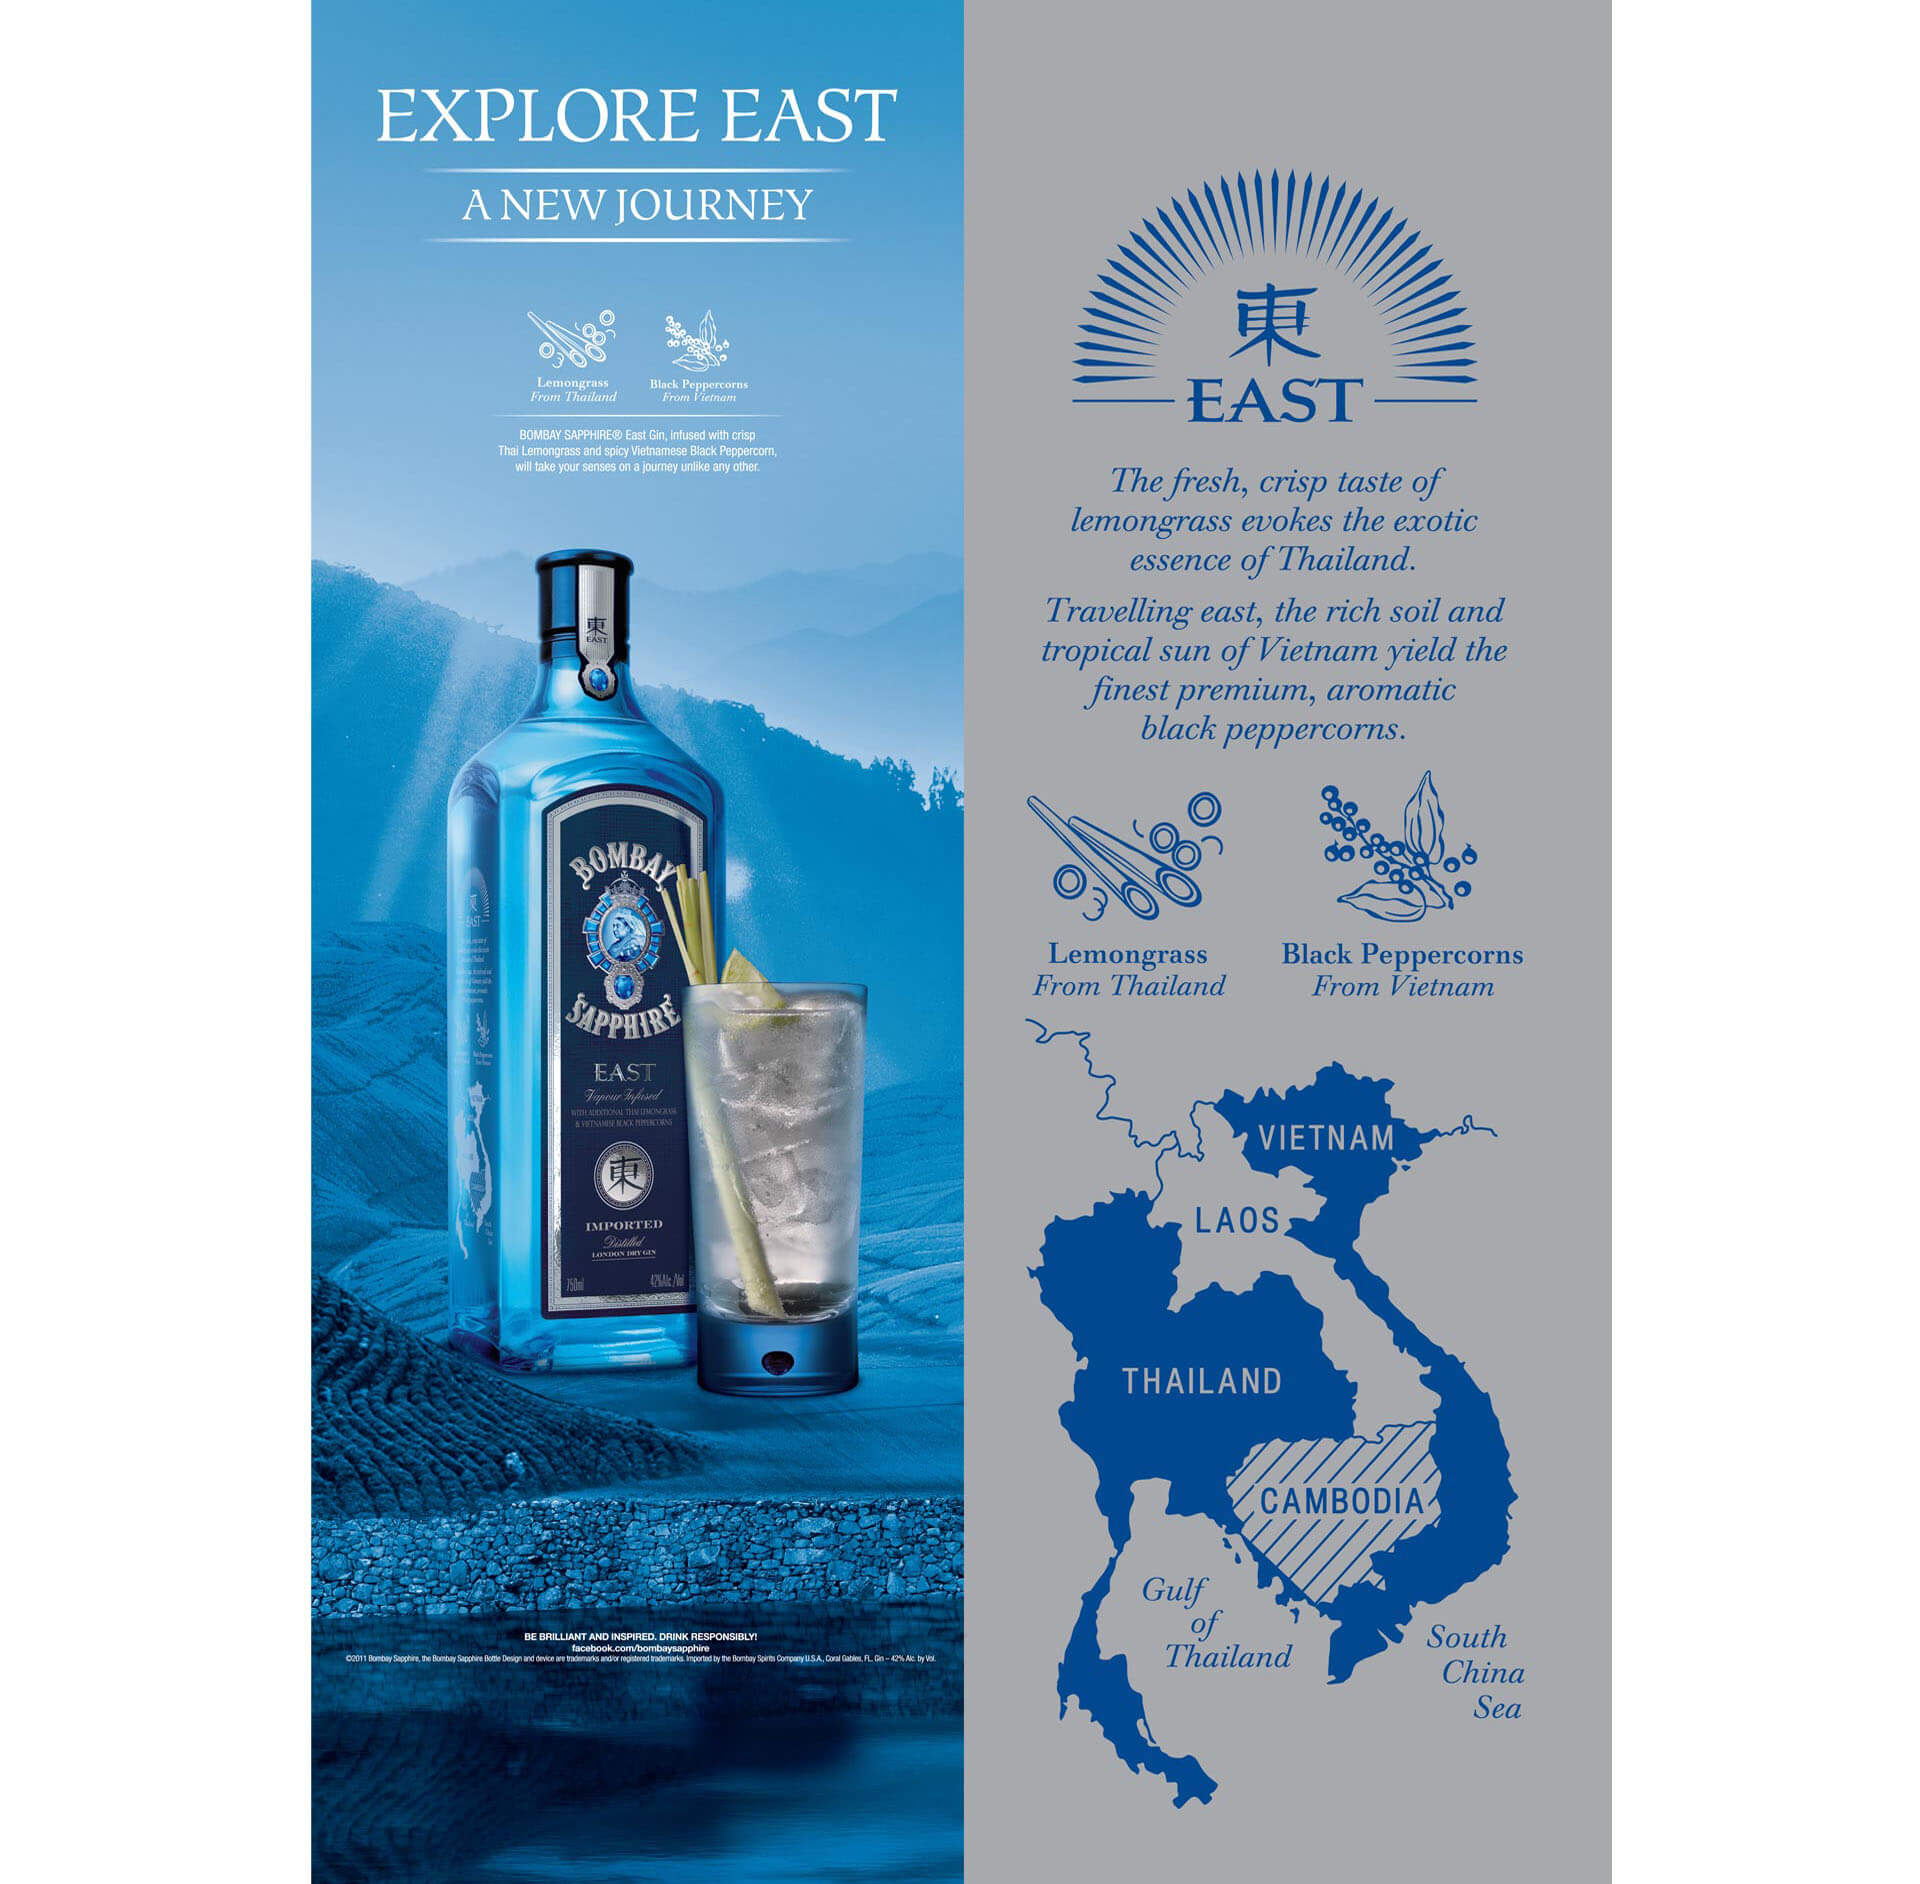 Bombay Sapphire East store branding and graphic photography for World Duty Free - Explore East a new journey